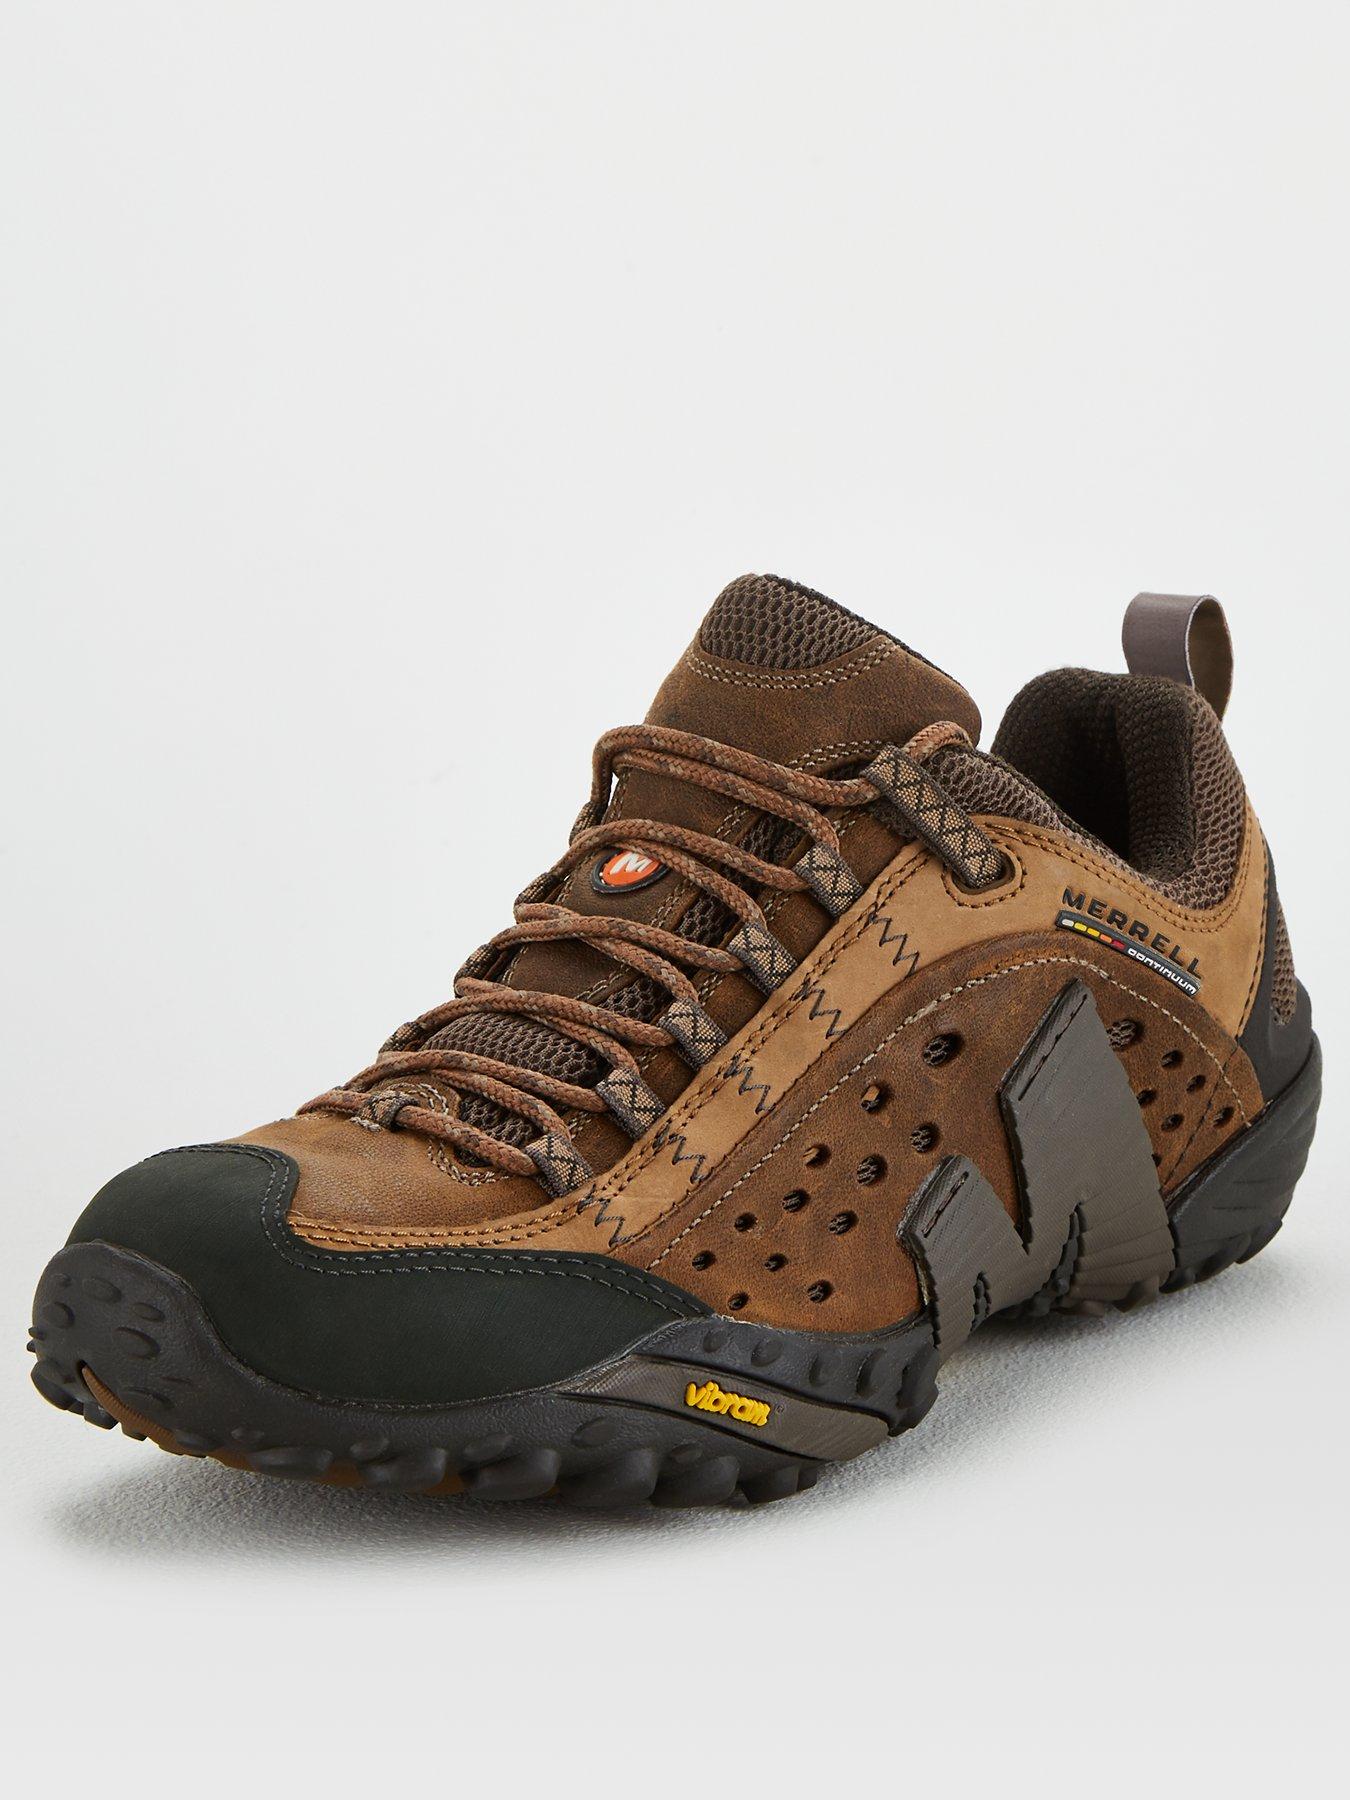 Merrell Leather Shoes - BROWN